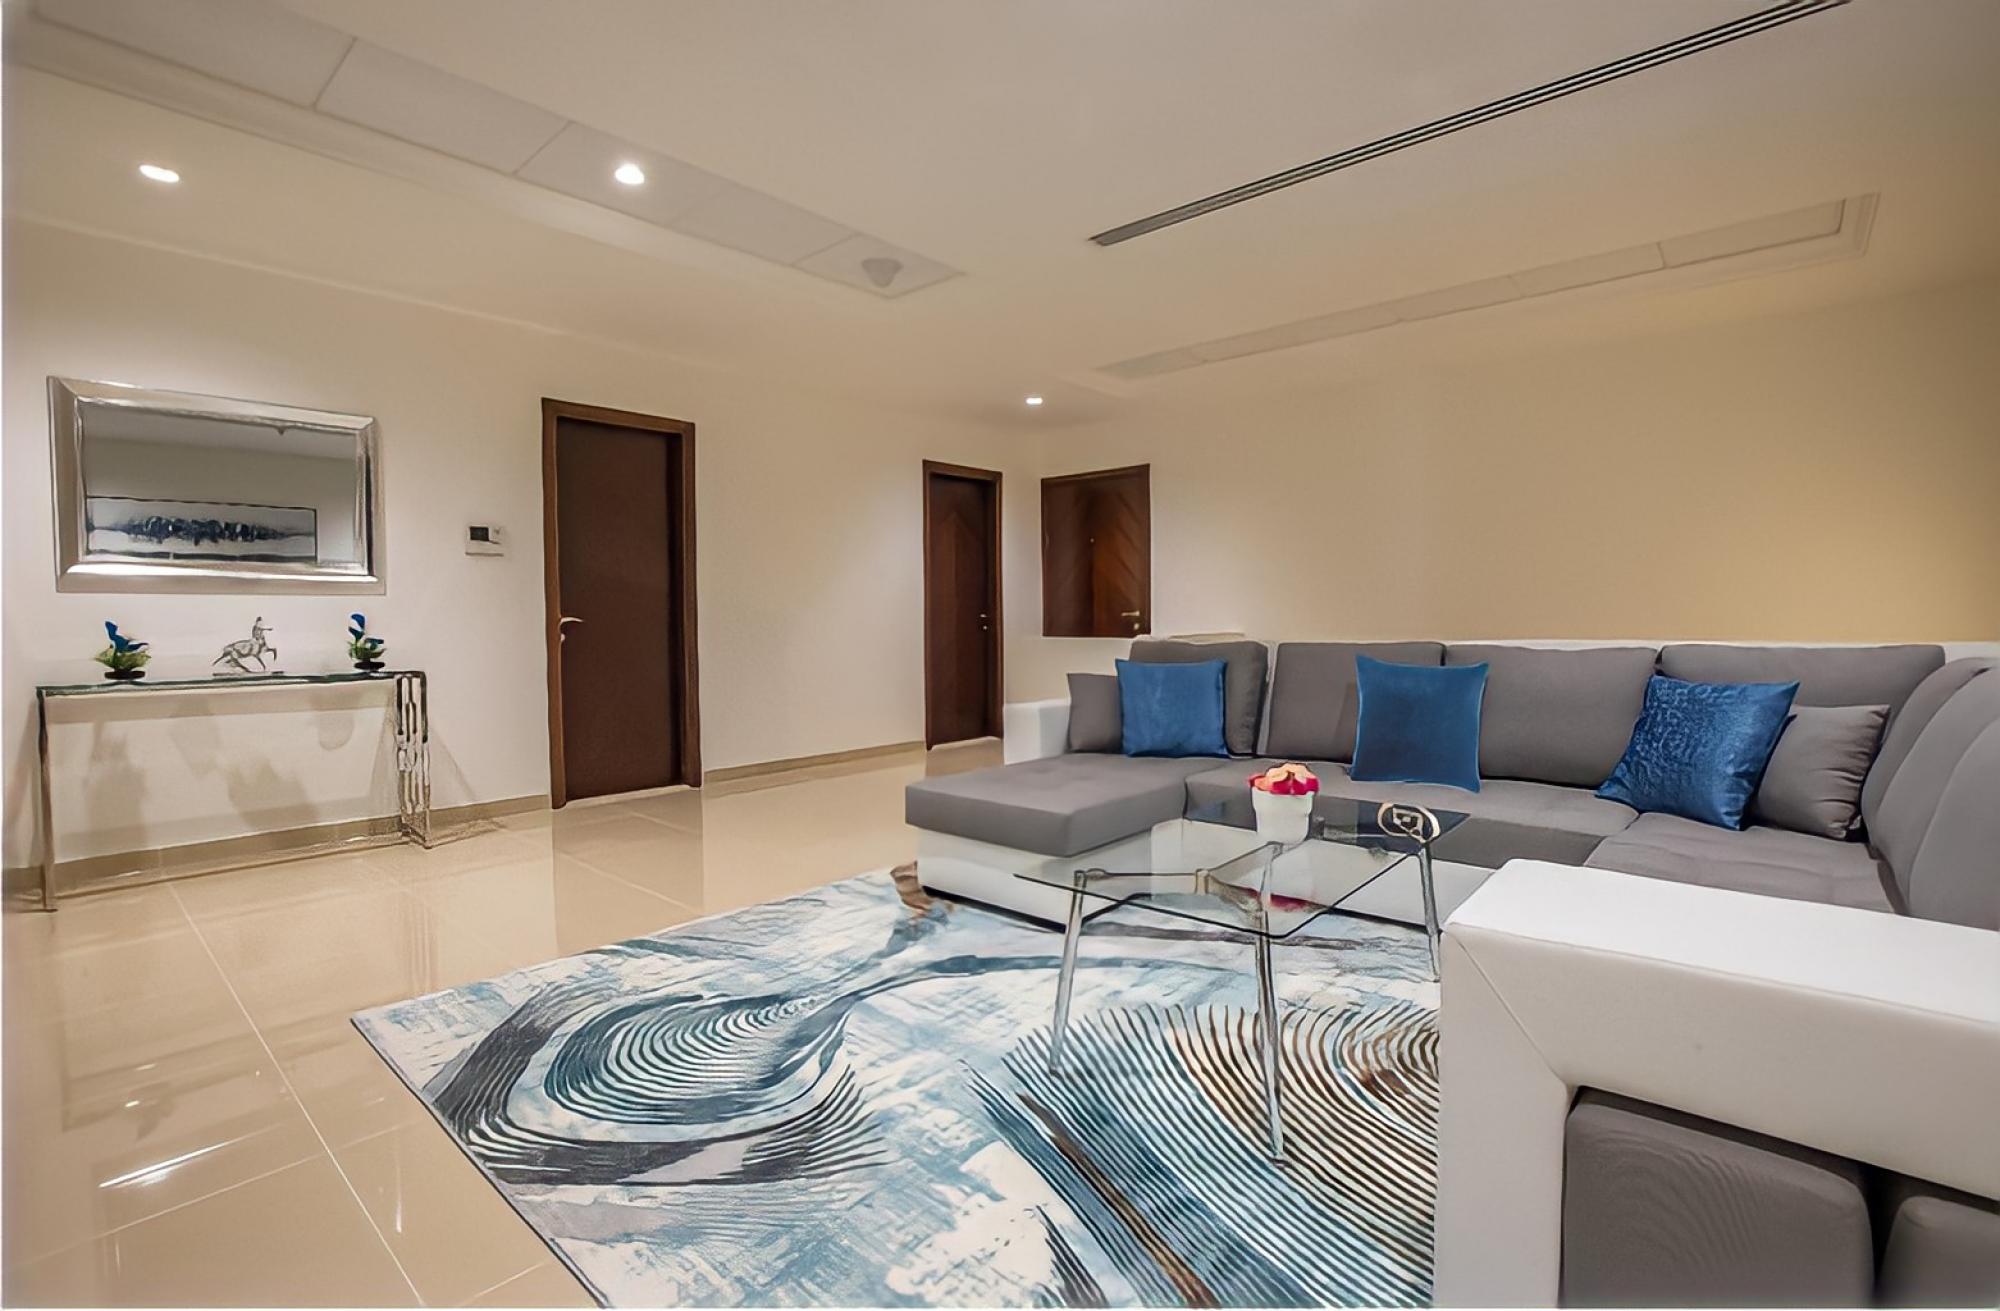 Property Image 1 - Premium Townhome 300m2 Private Pool  Beach Parking 2 